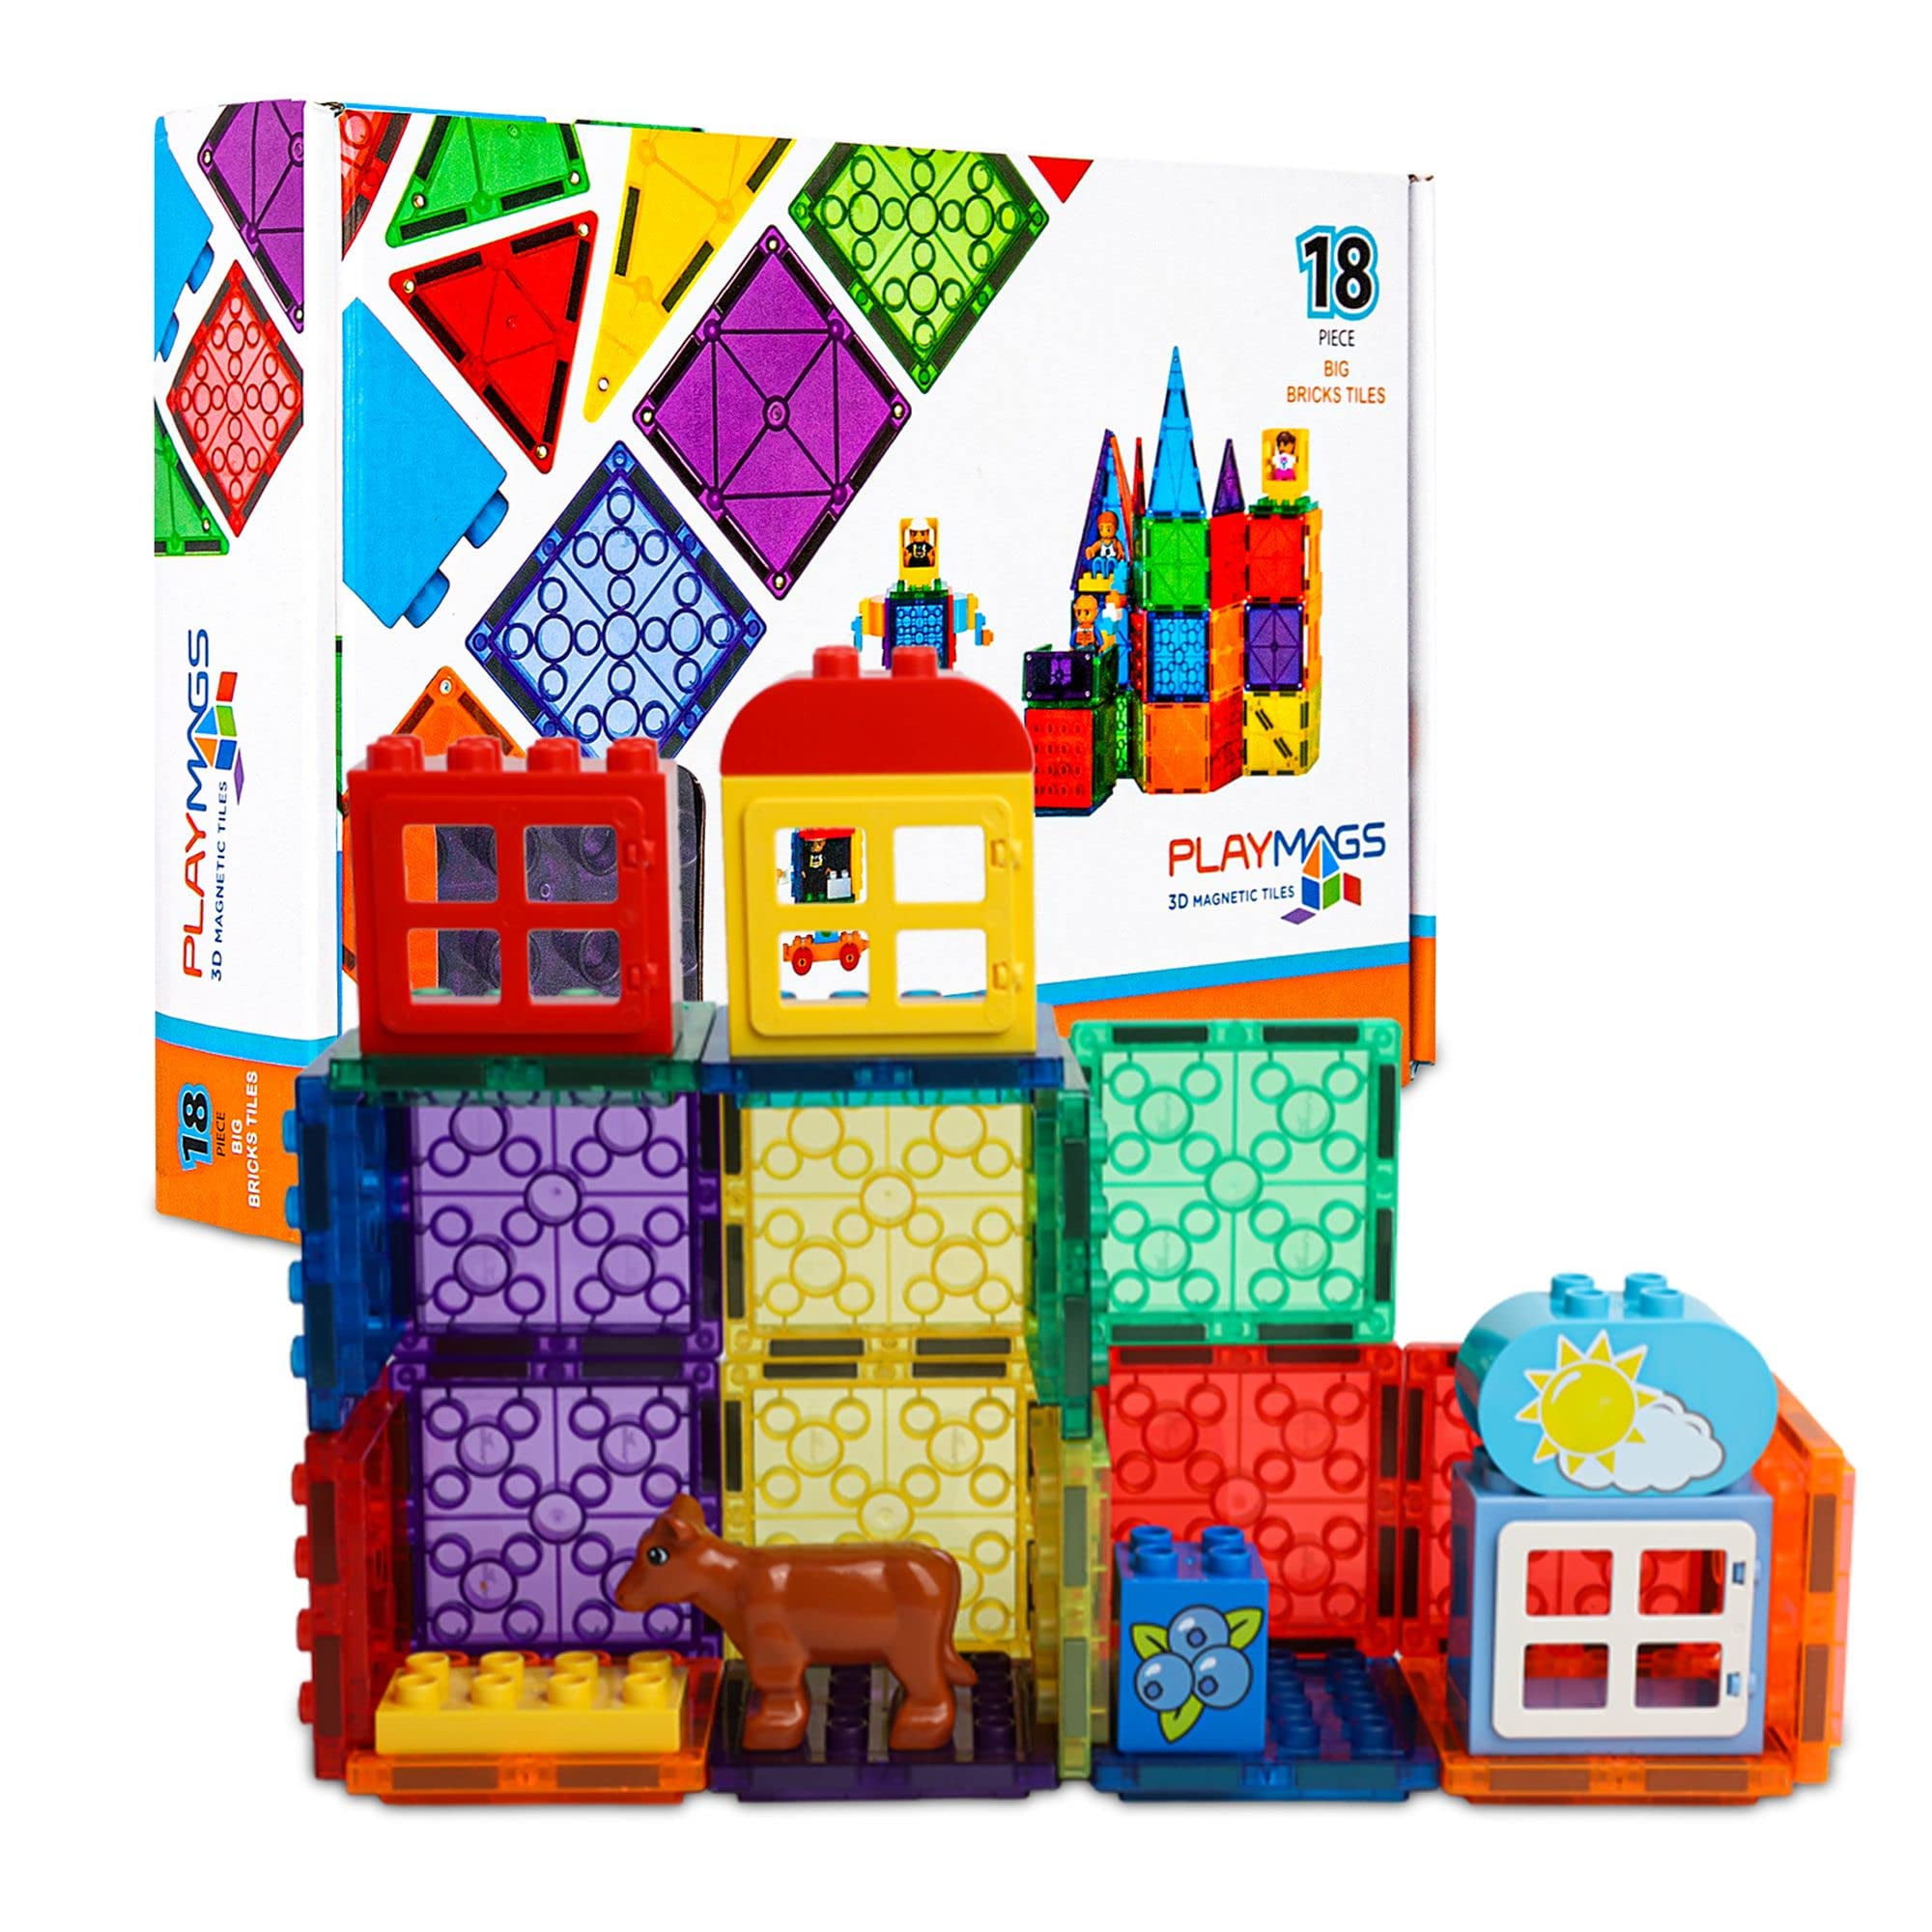 Award Winning Playmags Clear Colors Magnetic Tiles Deluxe Building Set 100 Pi... 